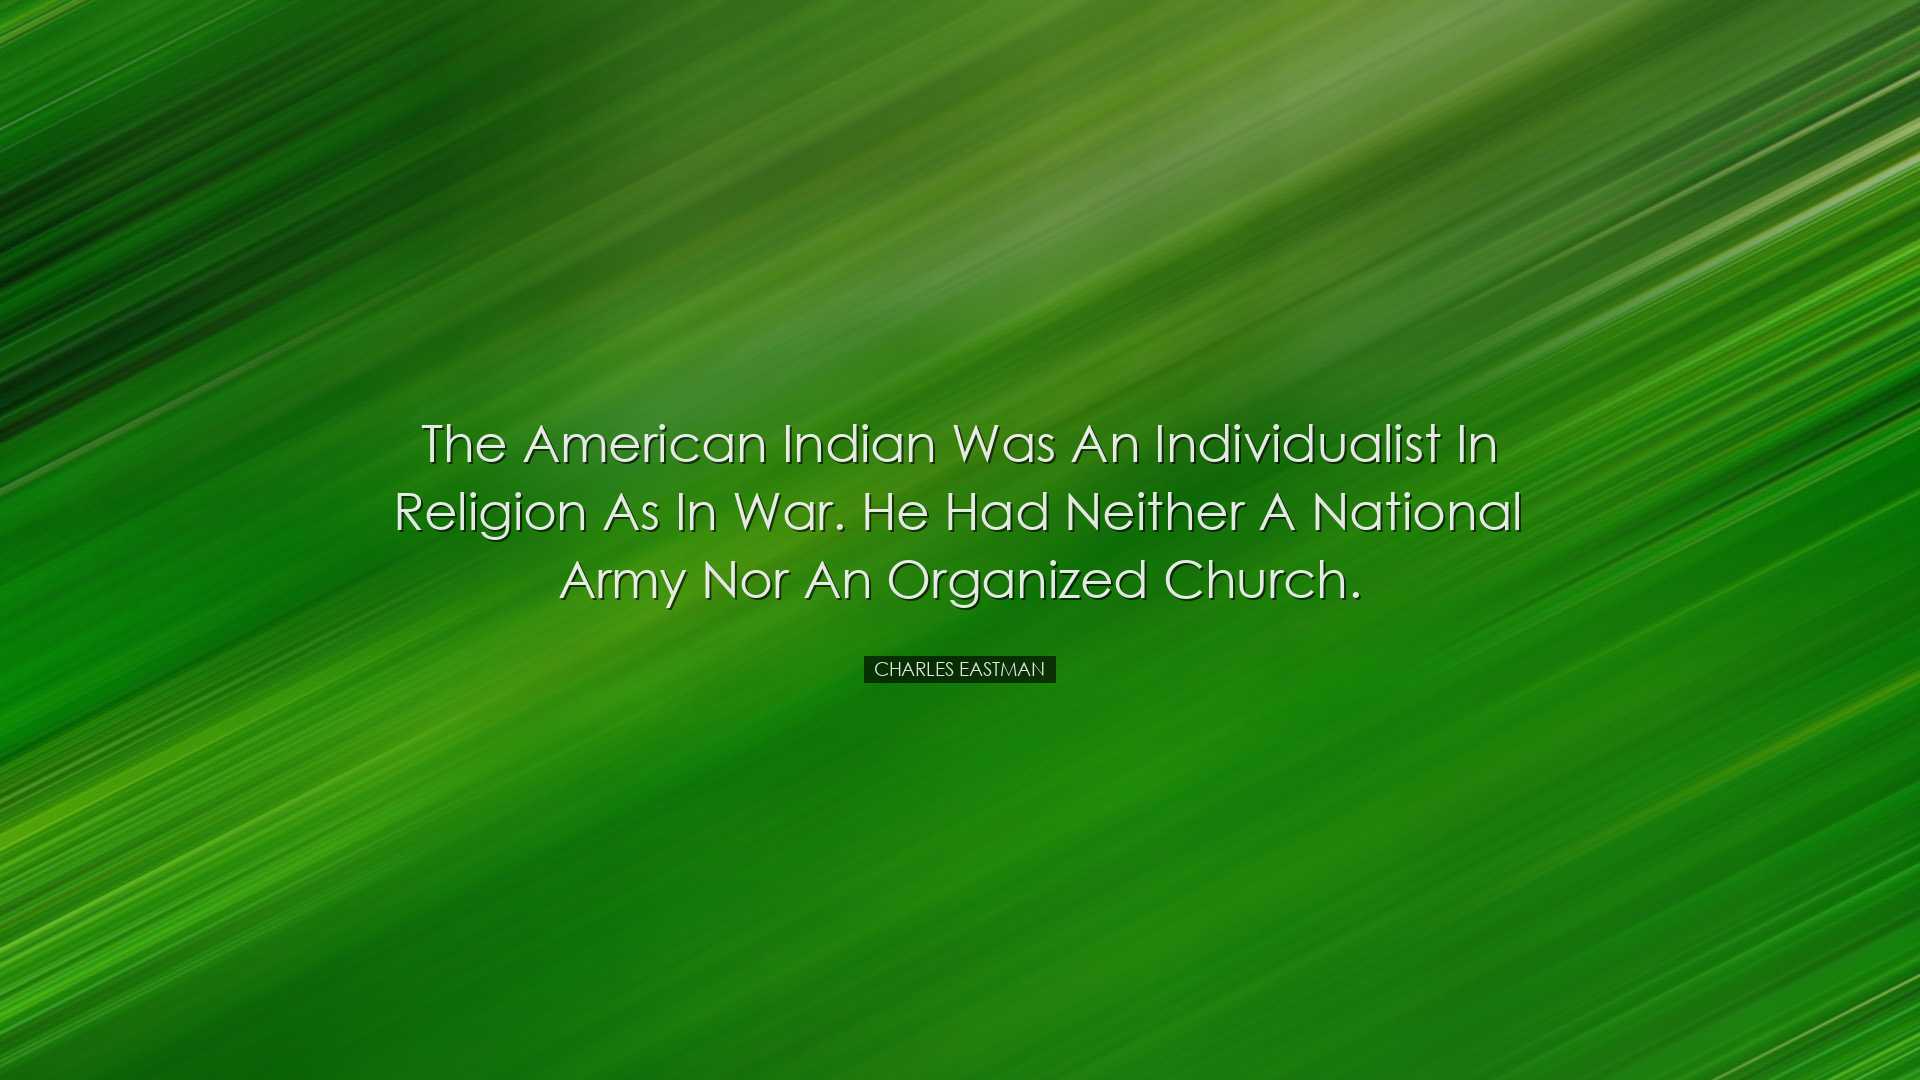 The American Indian was an individualist in religion as in war. He